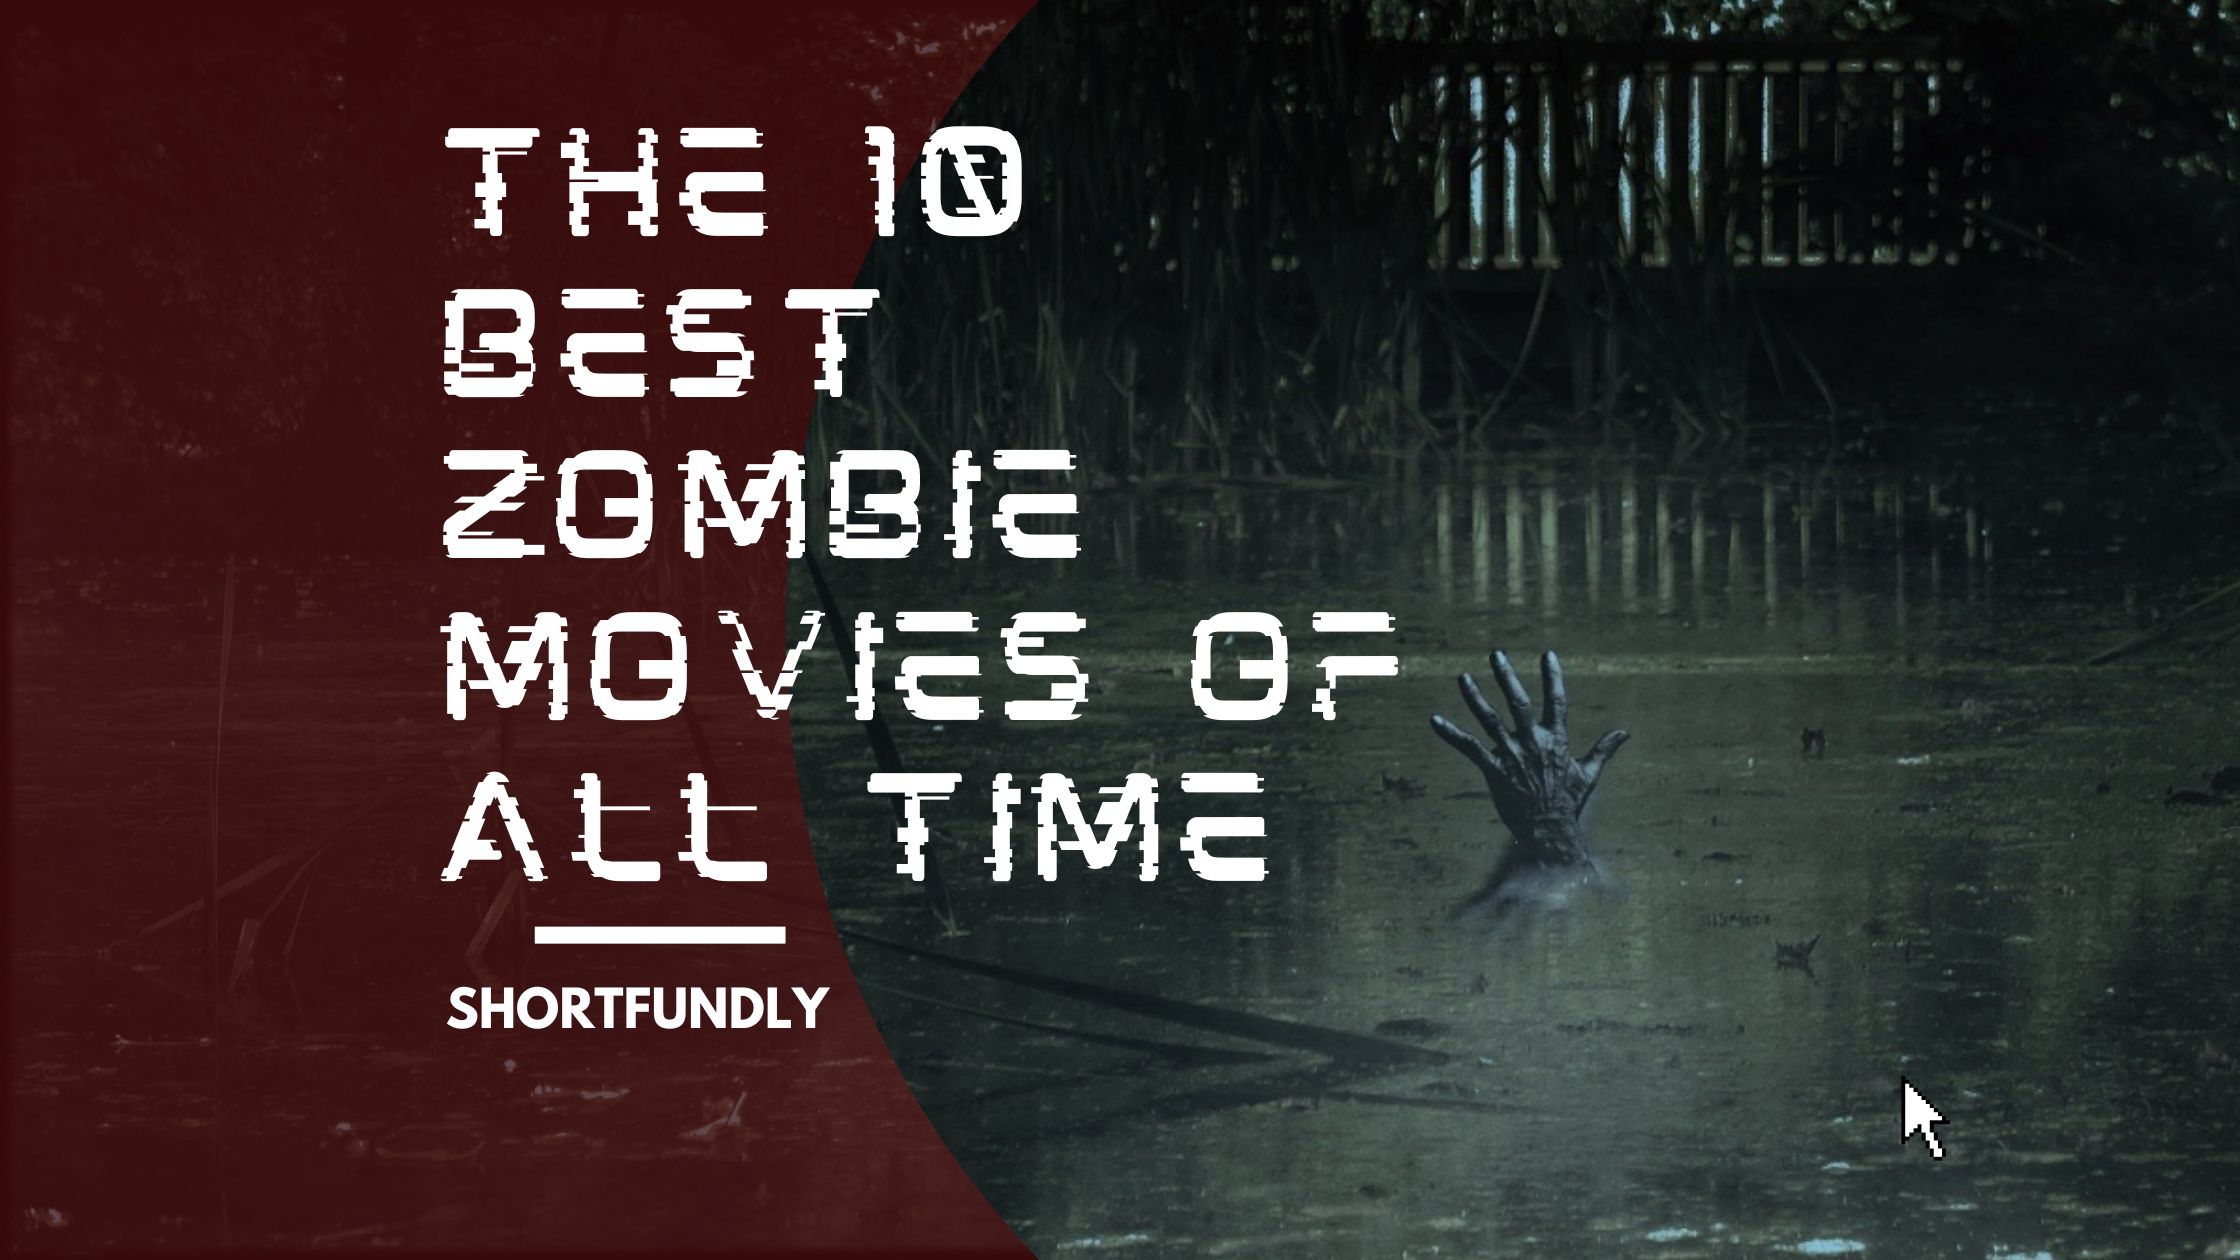 The 10 Best Zombie Movies of All Time